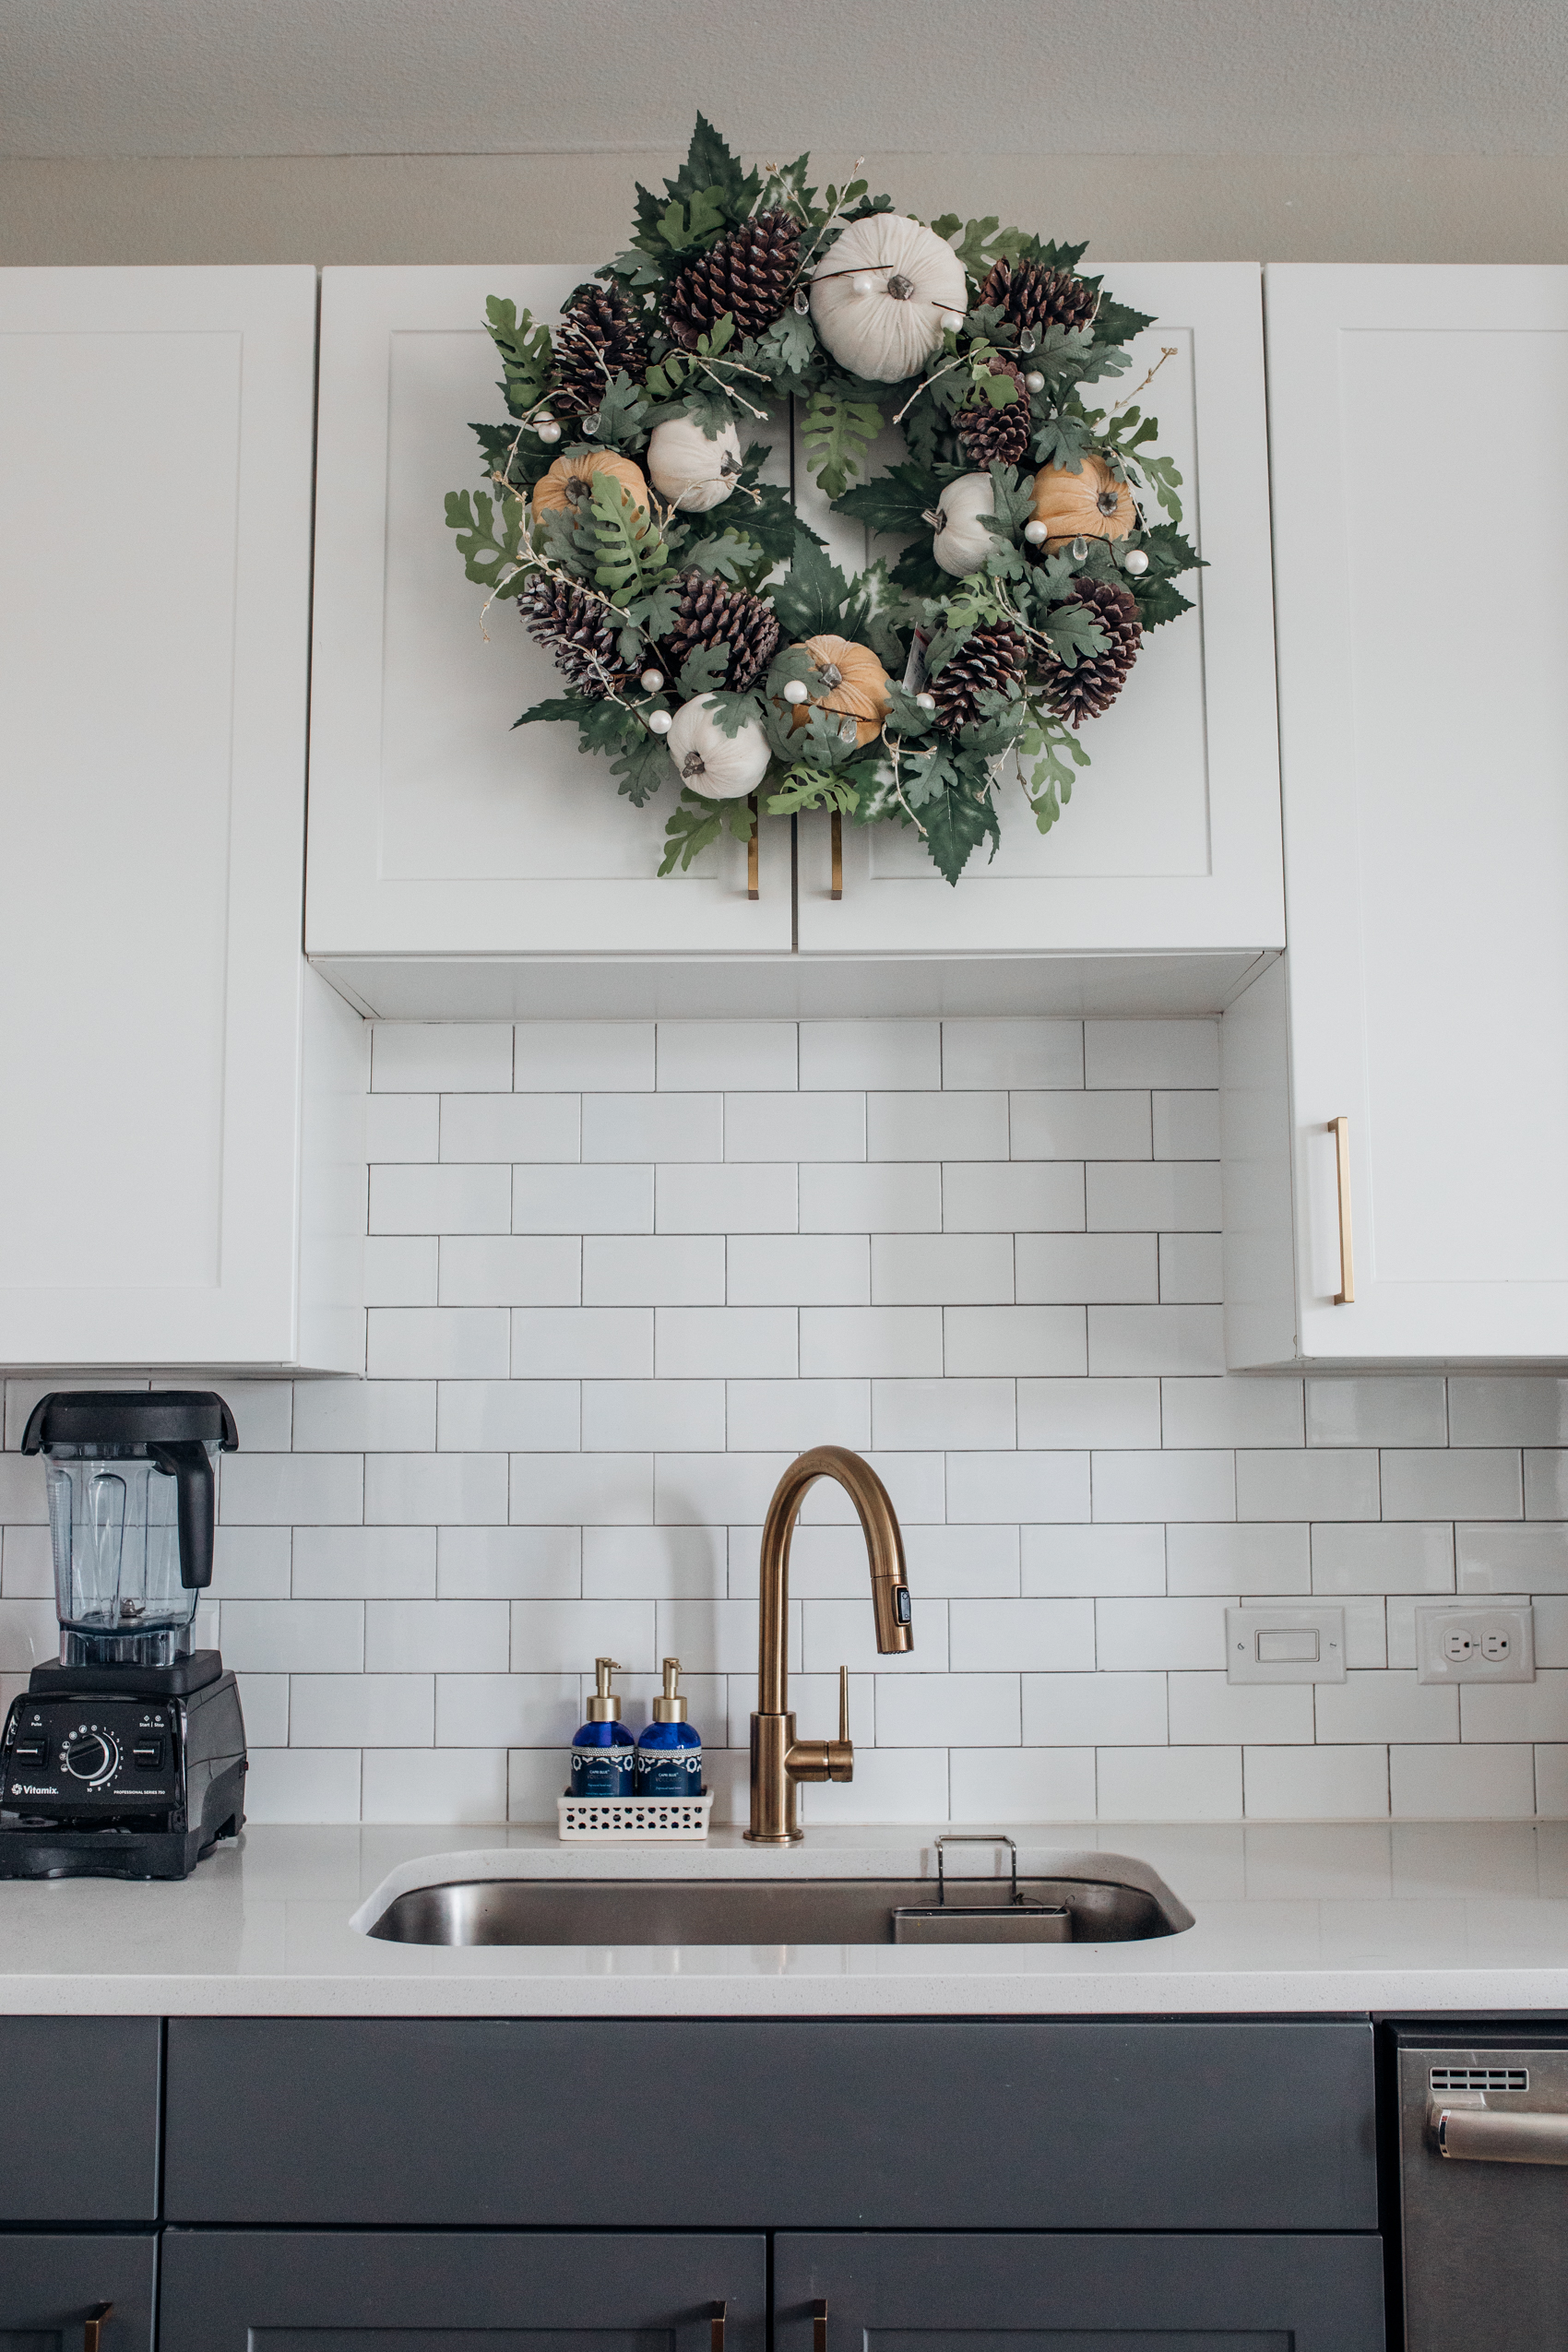 Velvet pumpkin and pinecone wreath for fall kitchen decor above a farmhouse sink with gold faucet